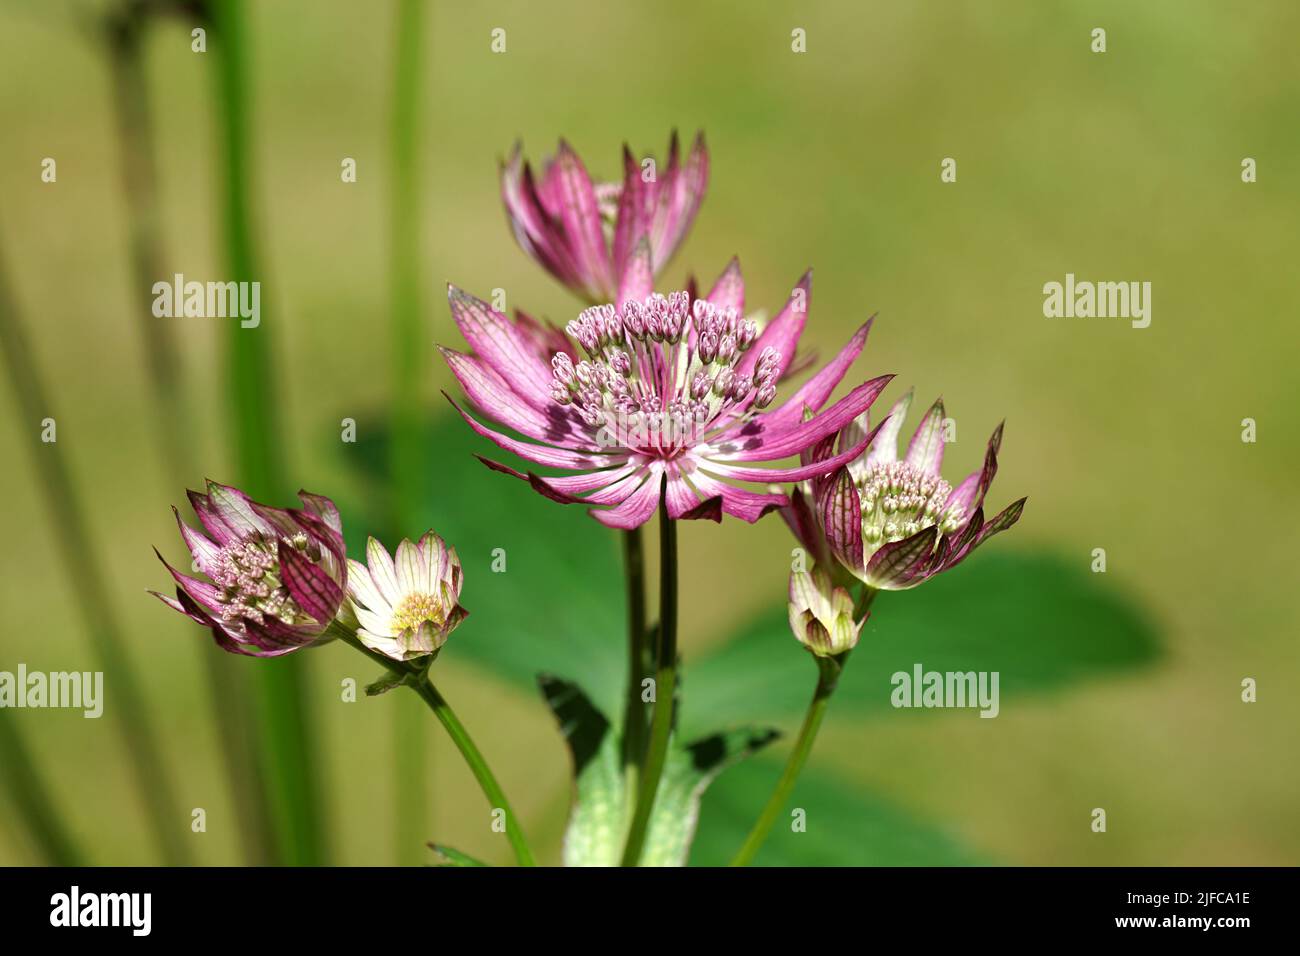 Closeup Flowers of Astrantia major 'Primadonna', the great masterwort, family Apiaceae. July, in a Dutch garden. Blurred lawn on the background. Stock Photo